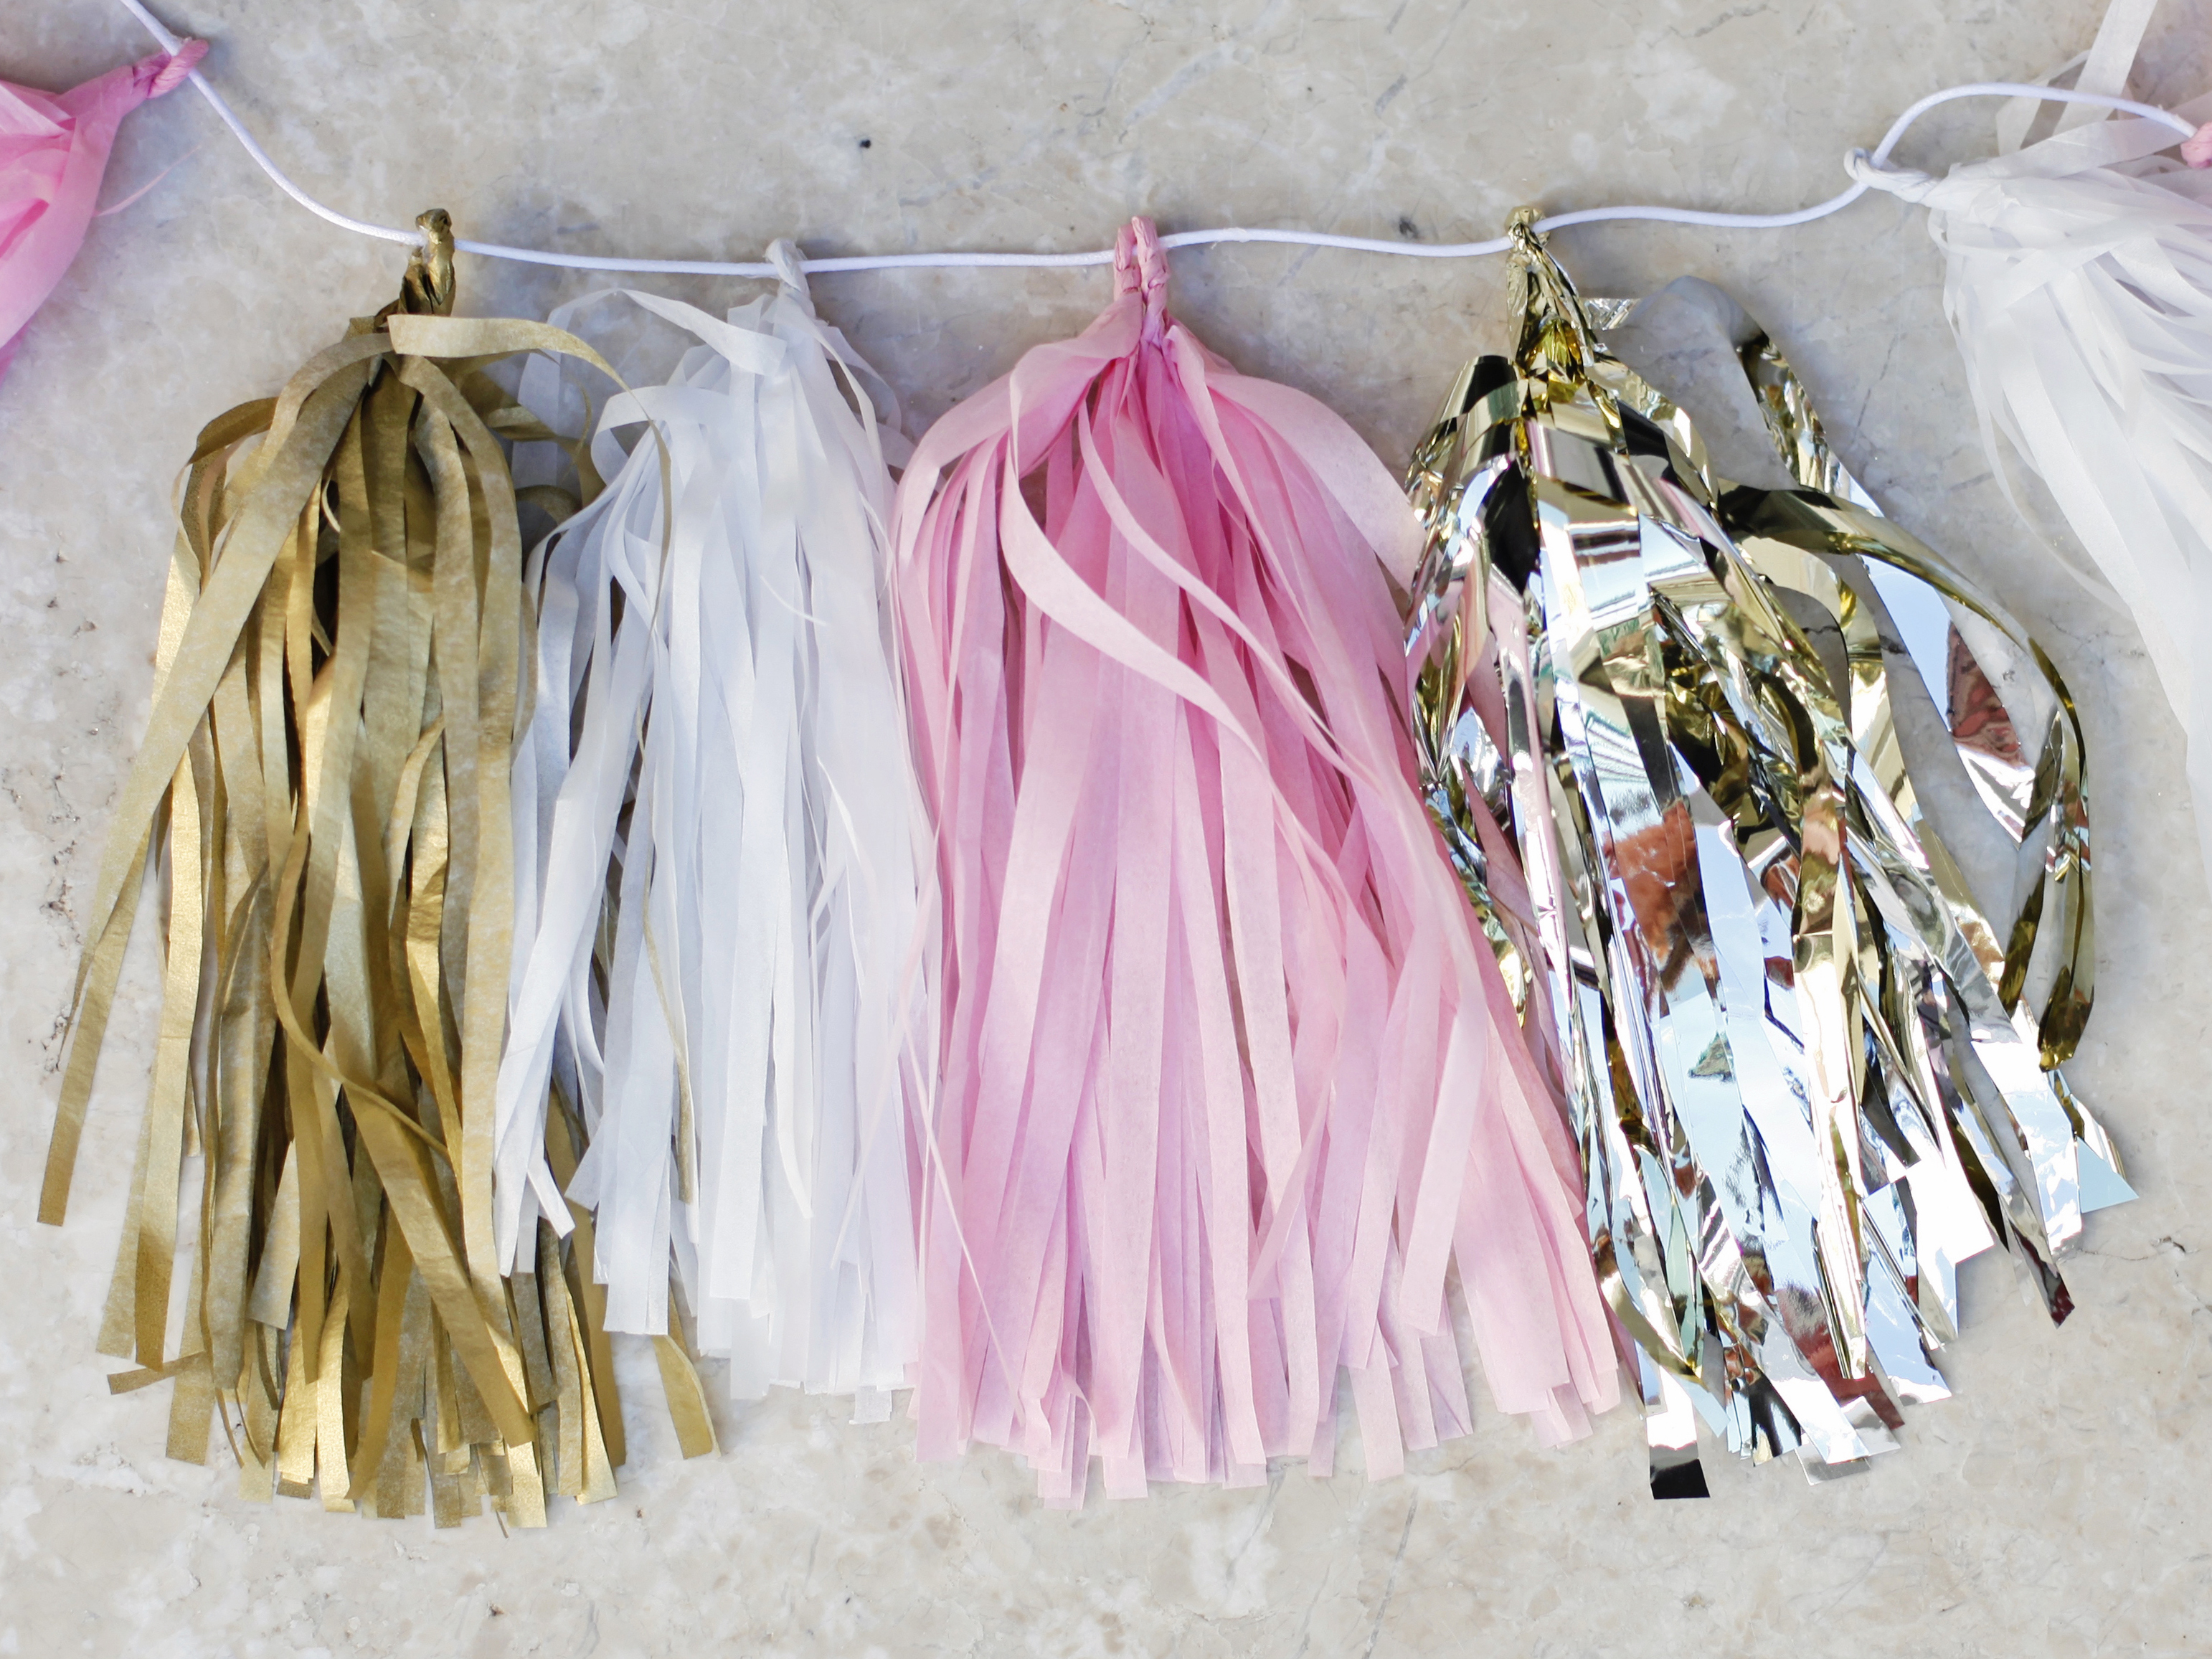 Wedding 1 Set 20 Pcs Tissue Paper Tassels Tassels for Birthday Party Decoration Used for Birthday Party Decorations,4 Colors